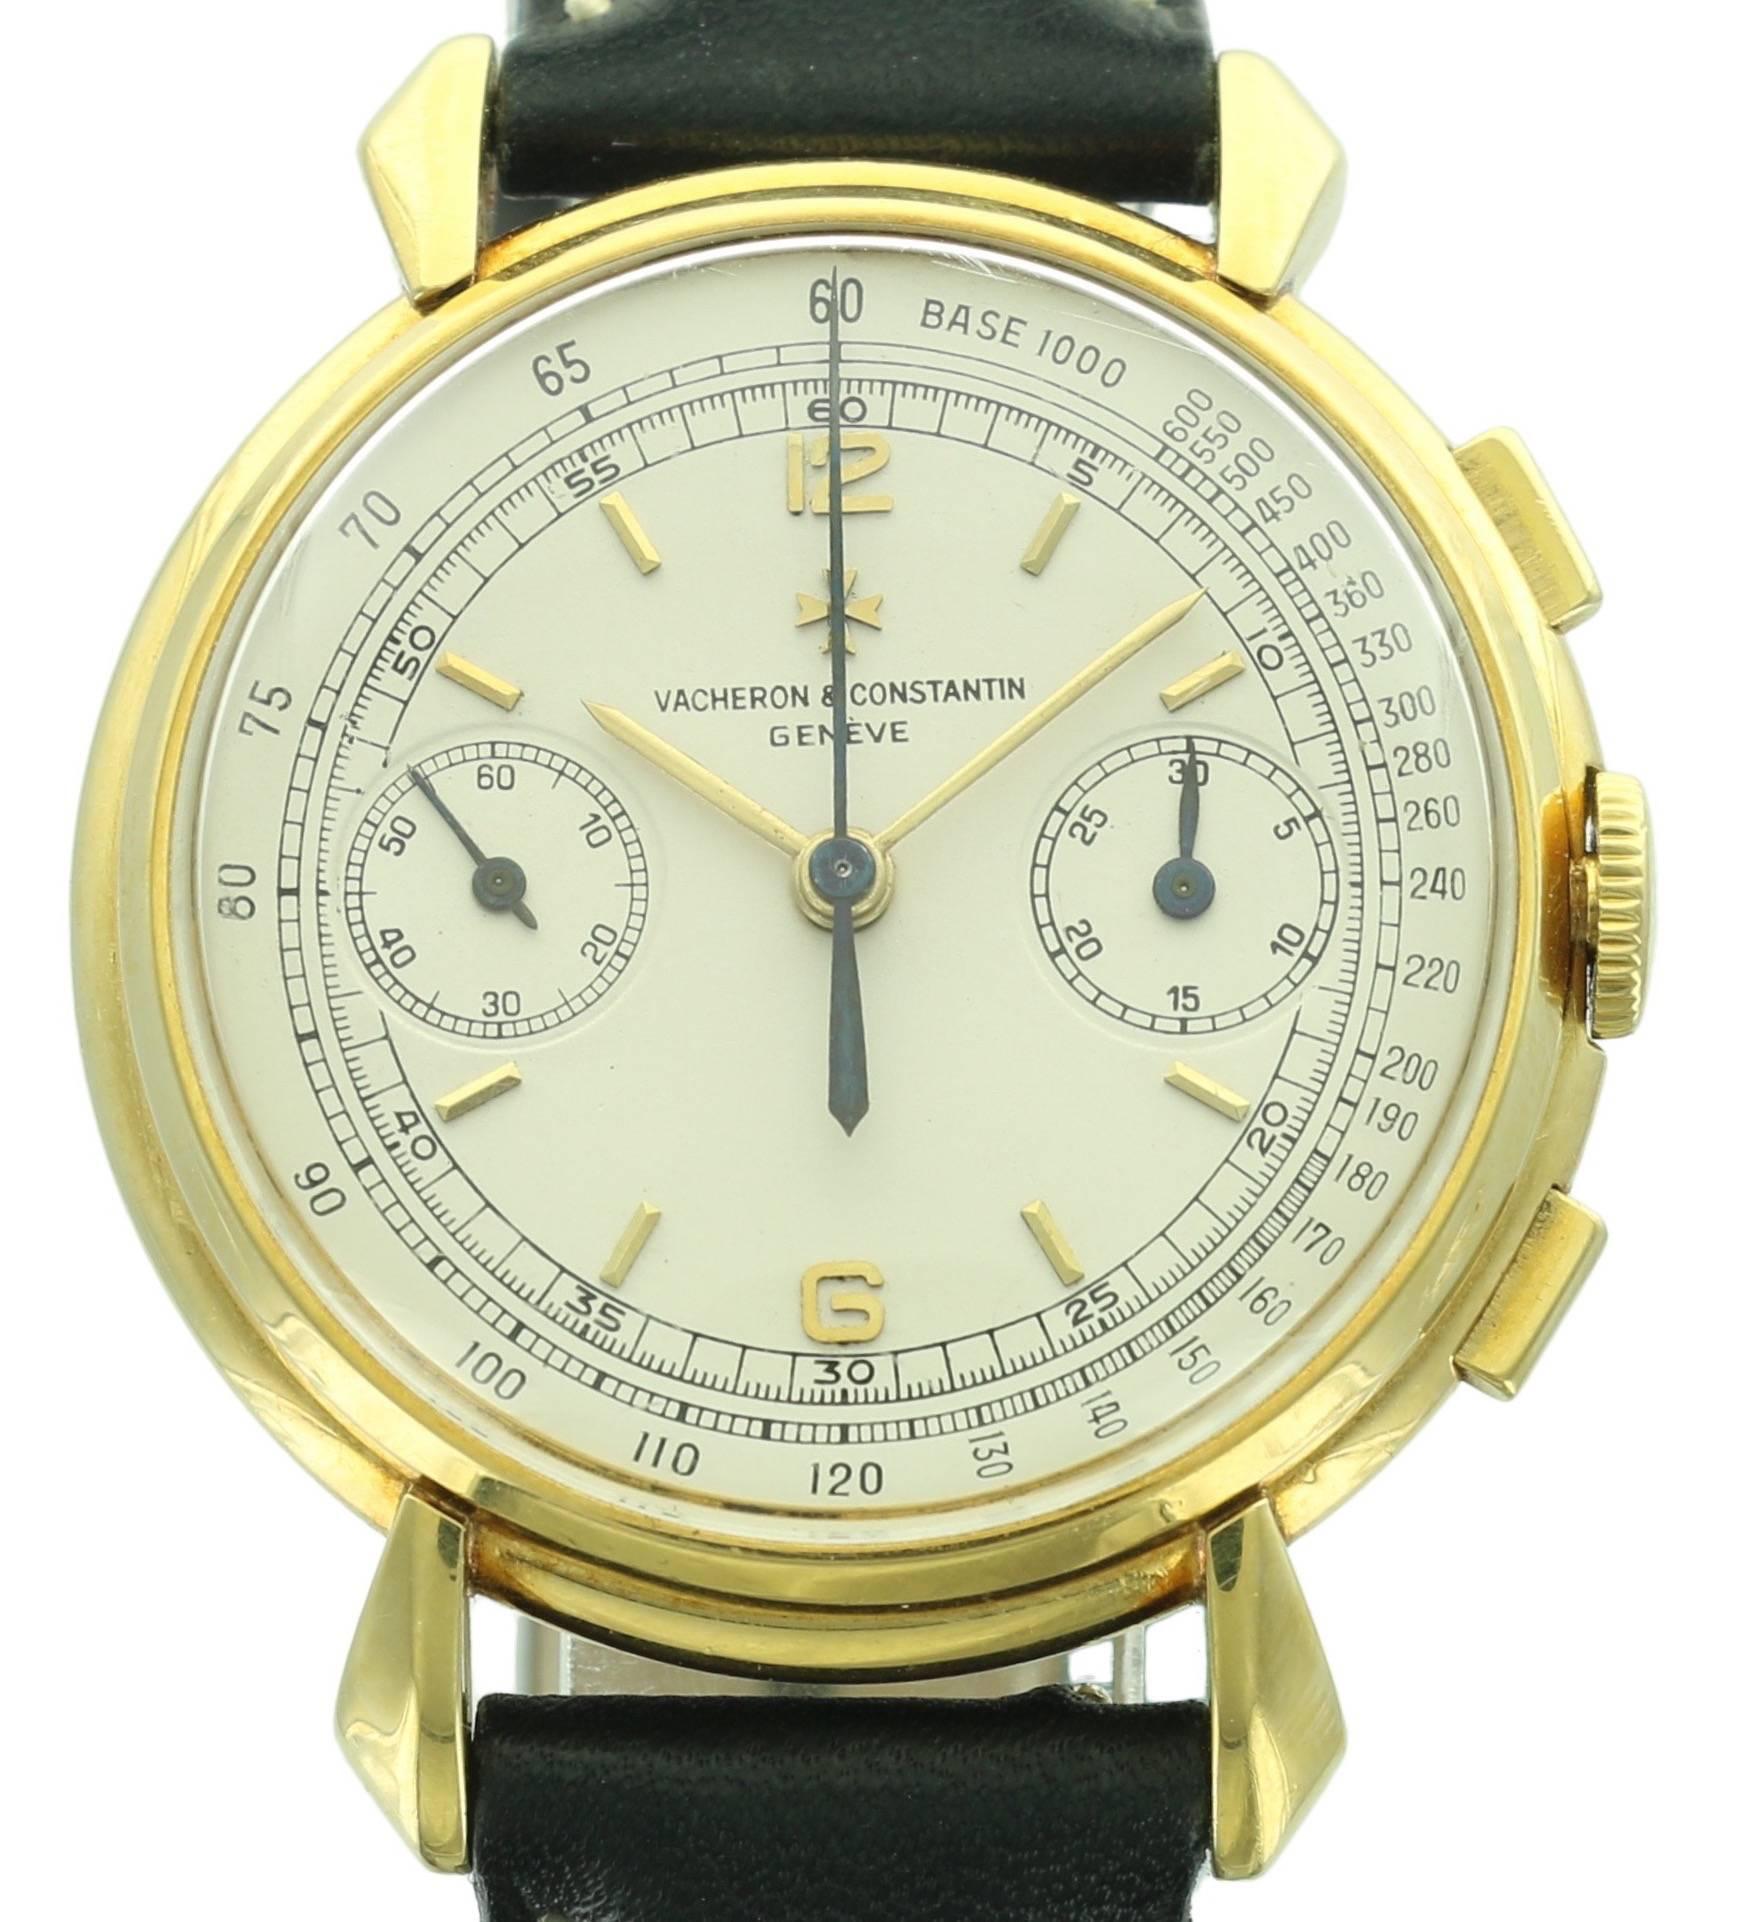 One of the most beautiful and classic chronographs produced, the Vacheron Constantin 4178 is a well balanced, elegant chronograph that can be worn casually or more dressed up. This is a rare opportunity at one of Vacheron's models pieces ever made. 